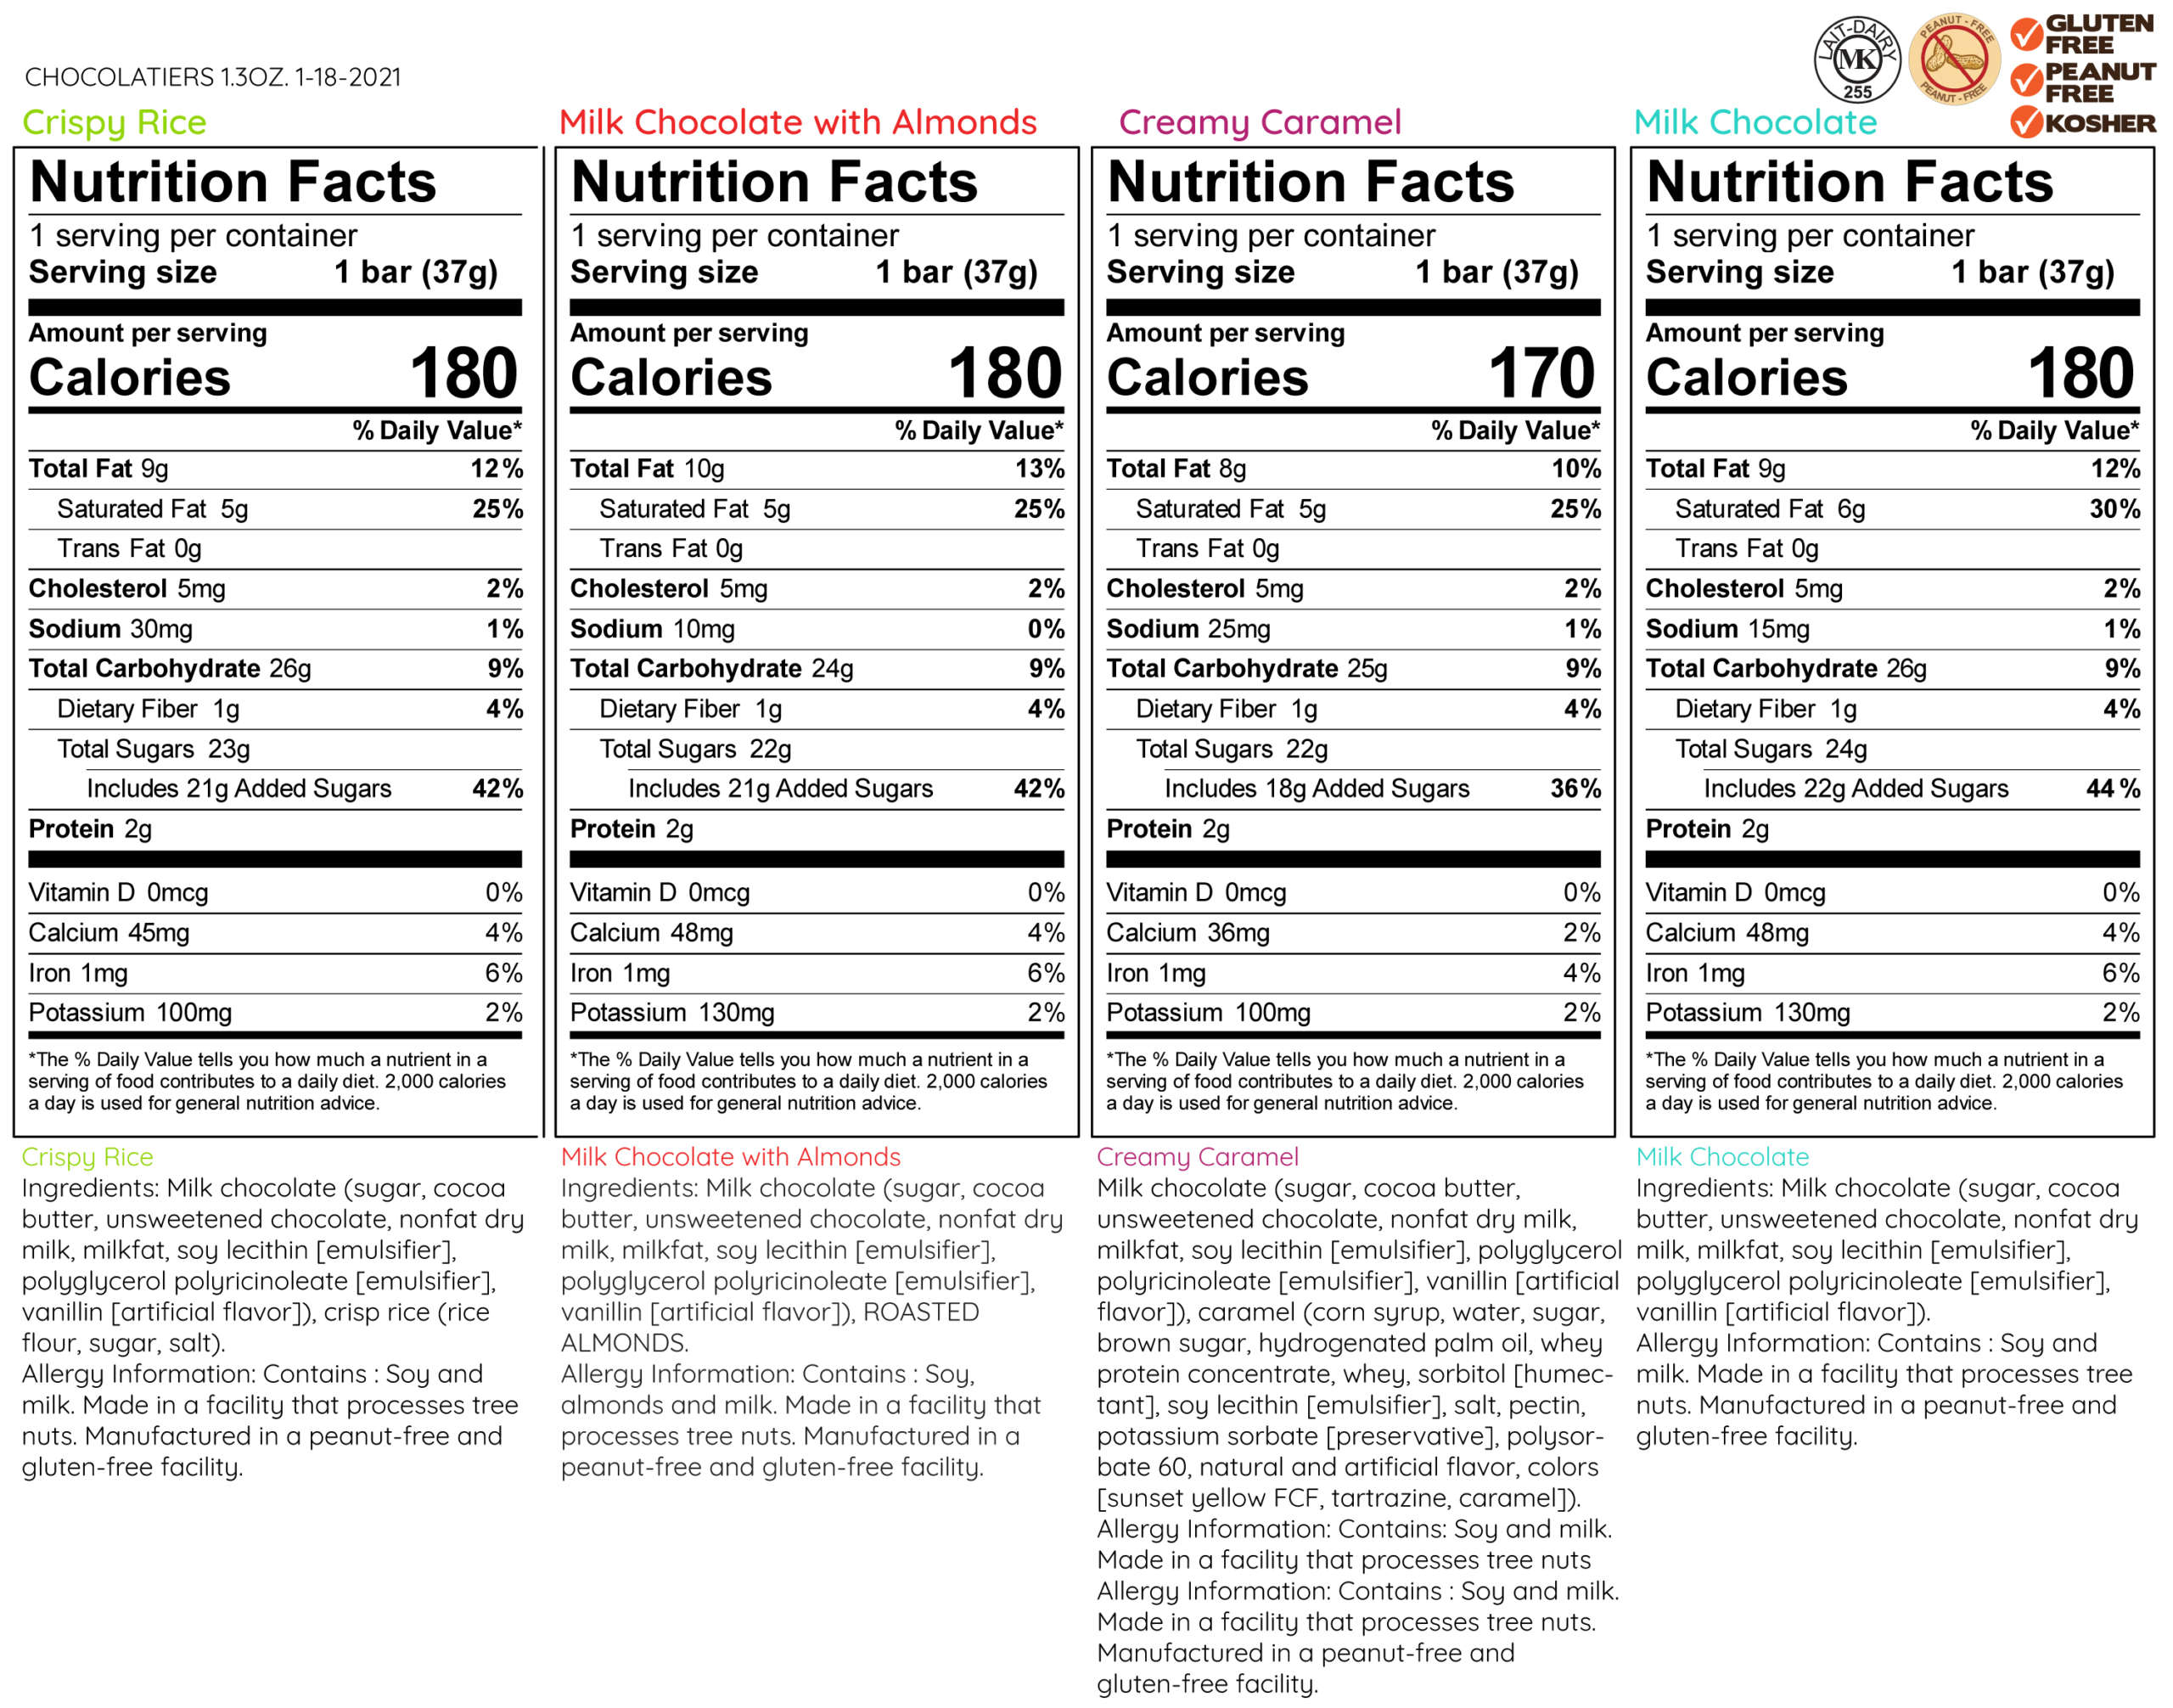 Chocolatiers-1.3oz-Ingredients-and-Nutrition-Facts